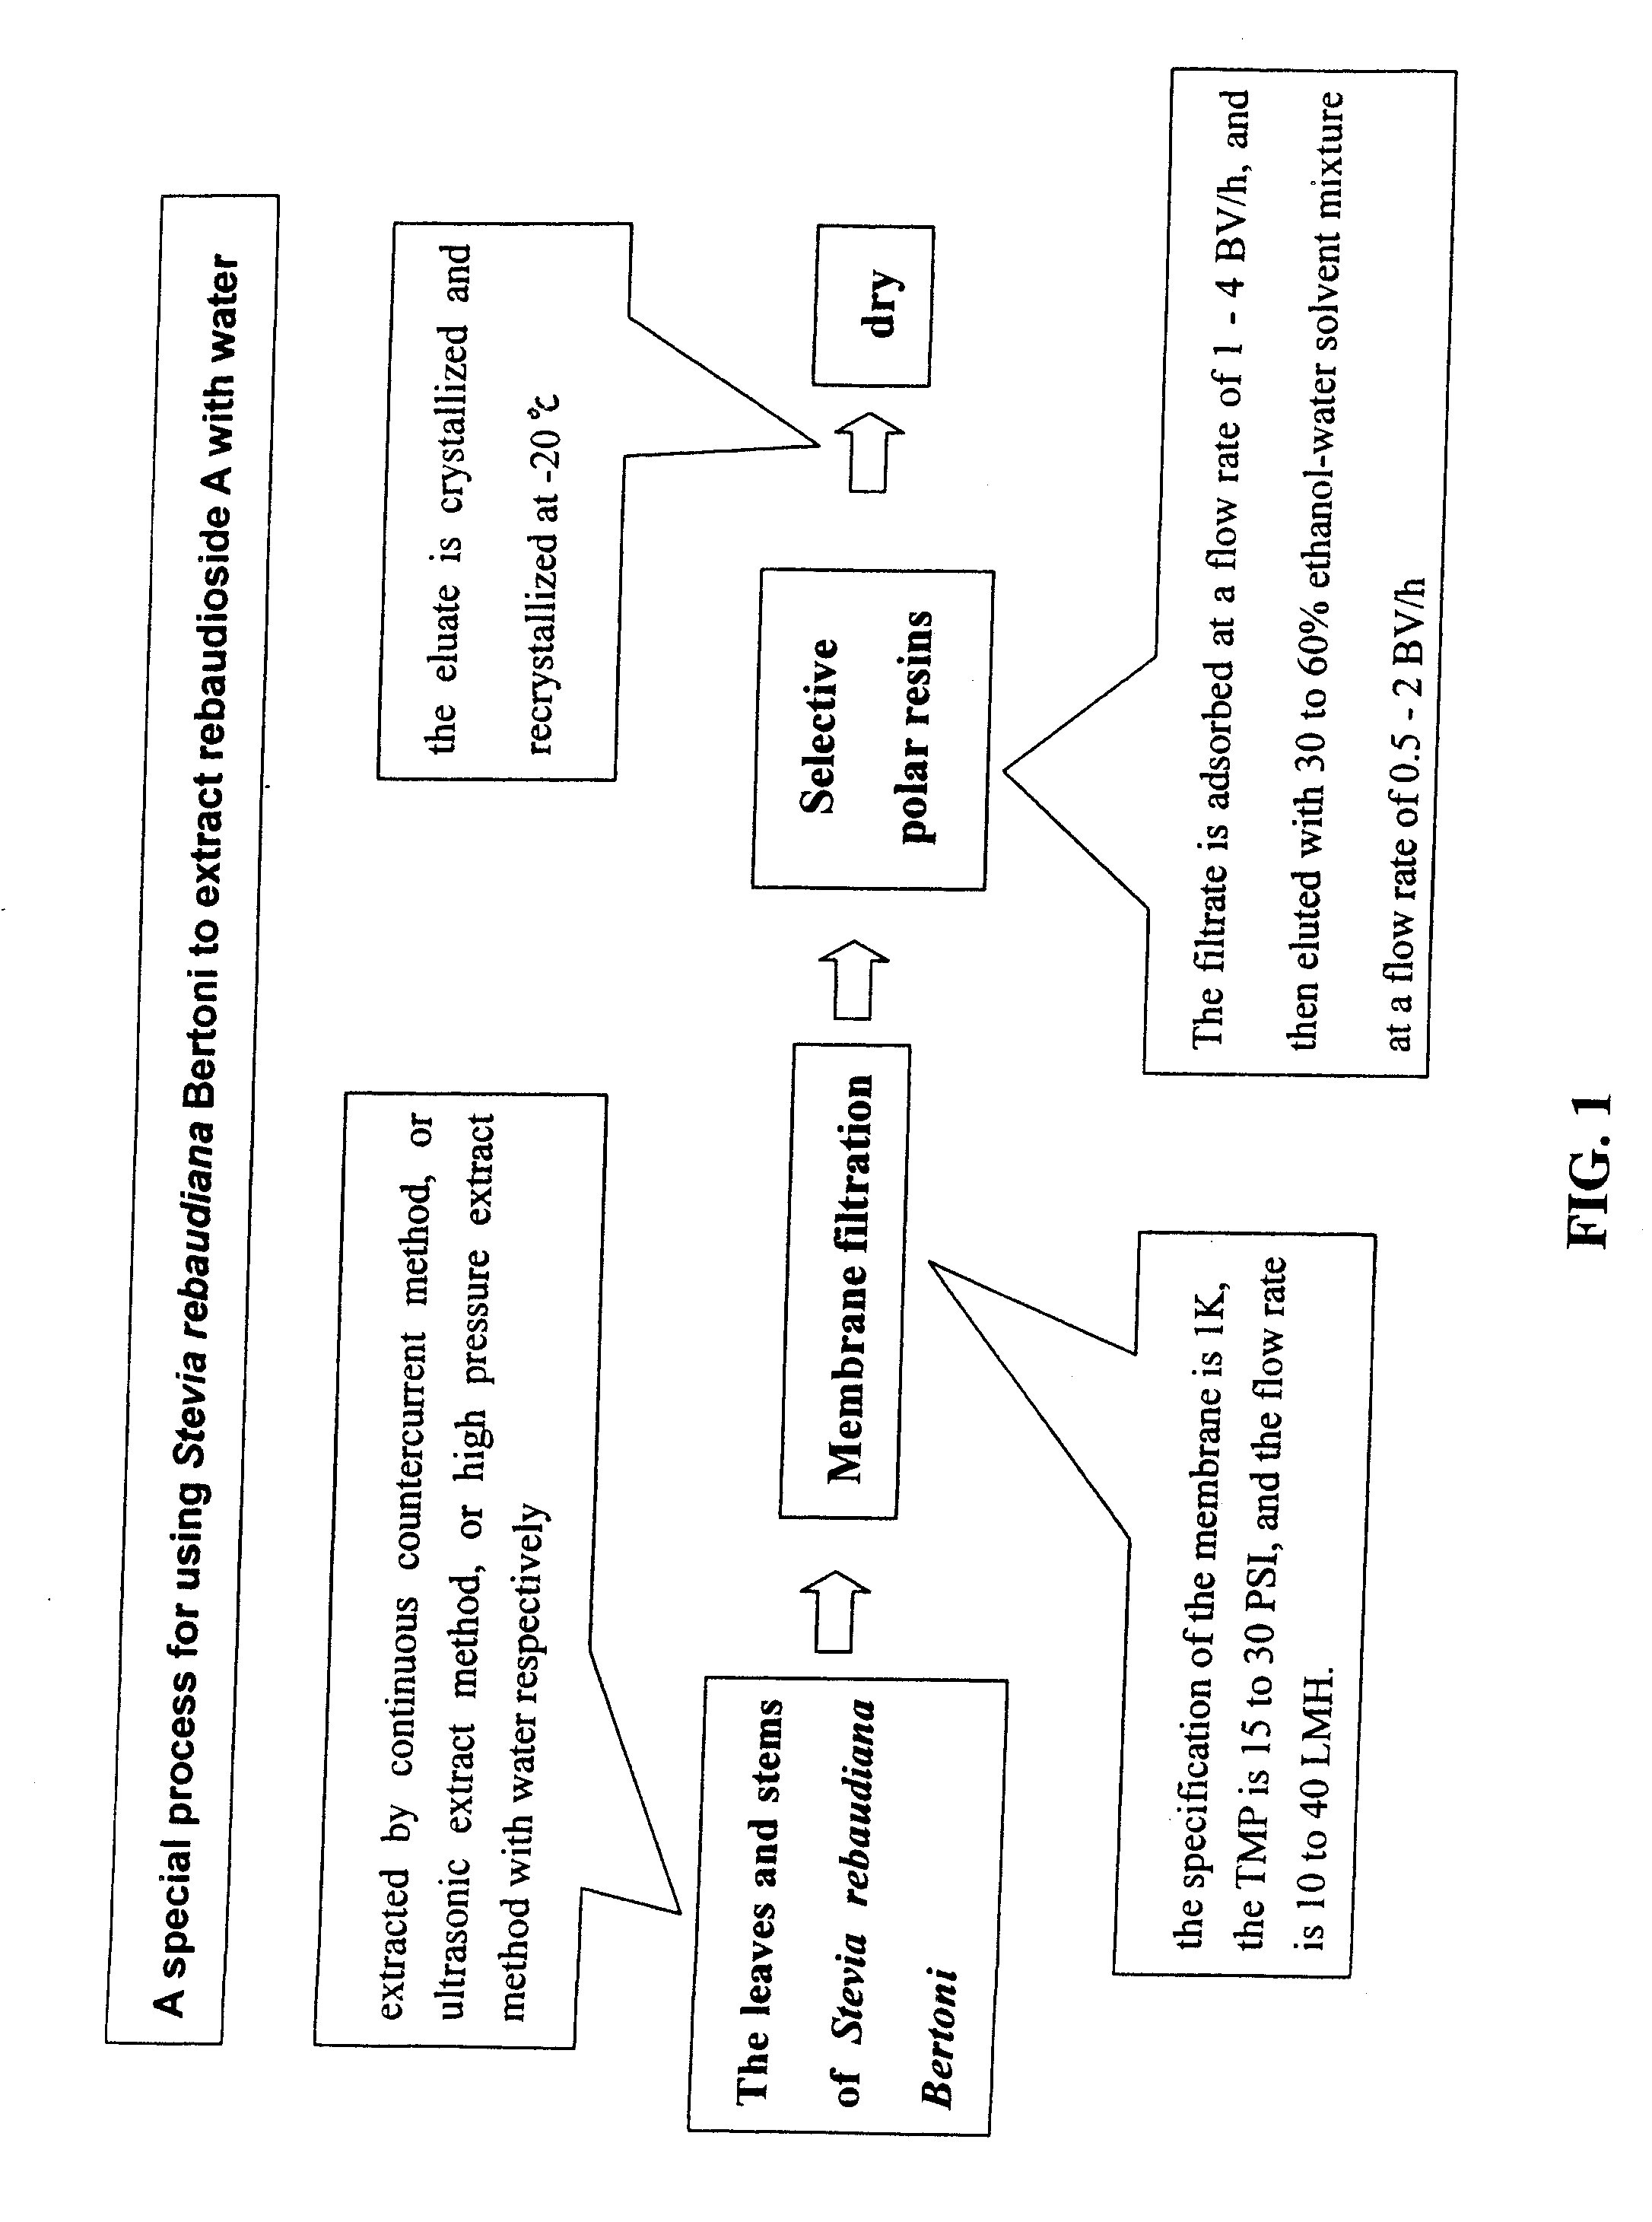 High-purity rebaudioside a and method of extracting same